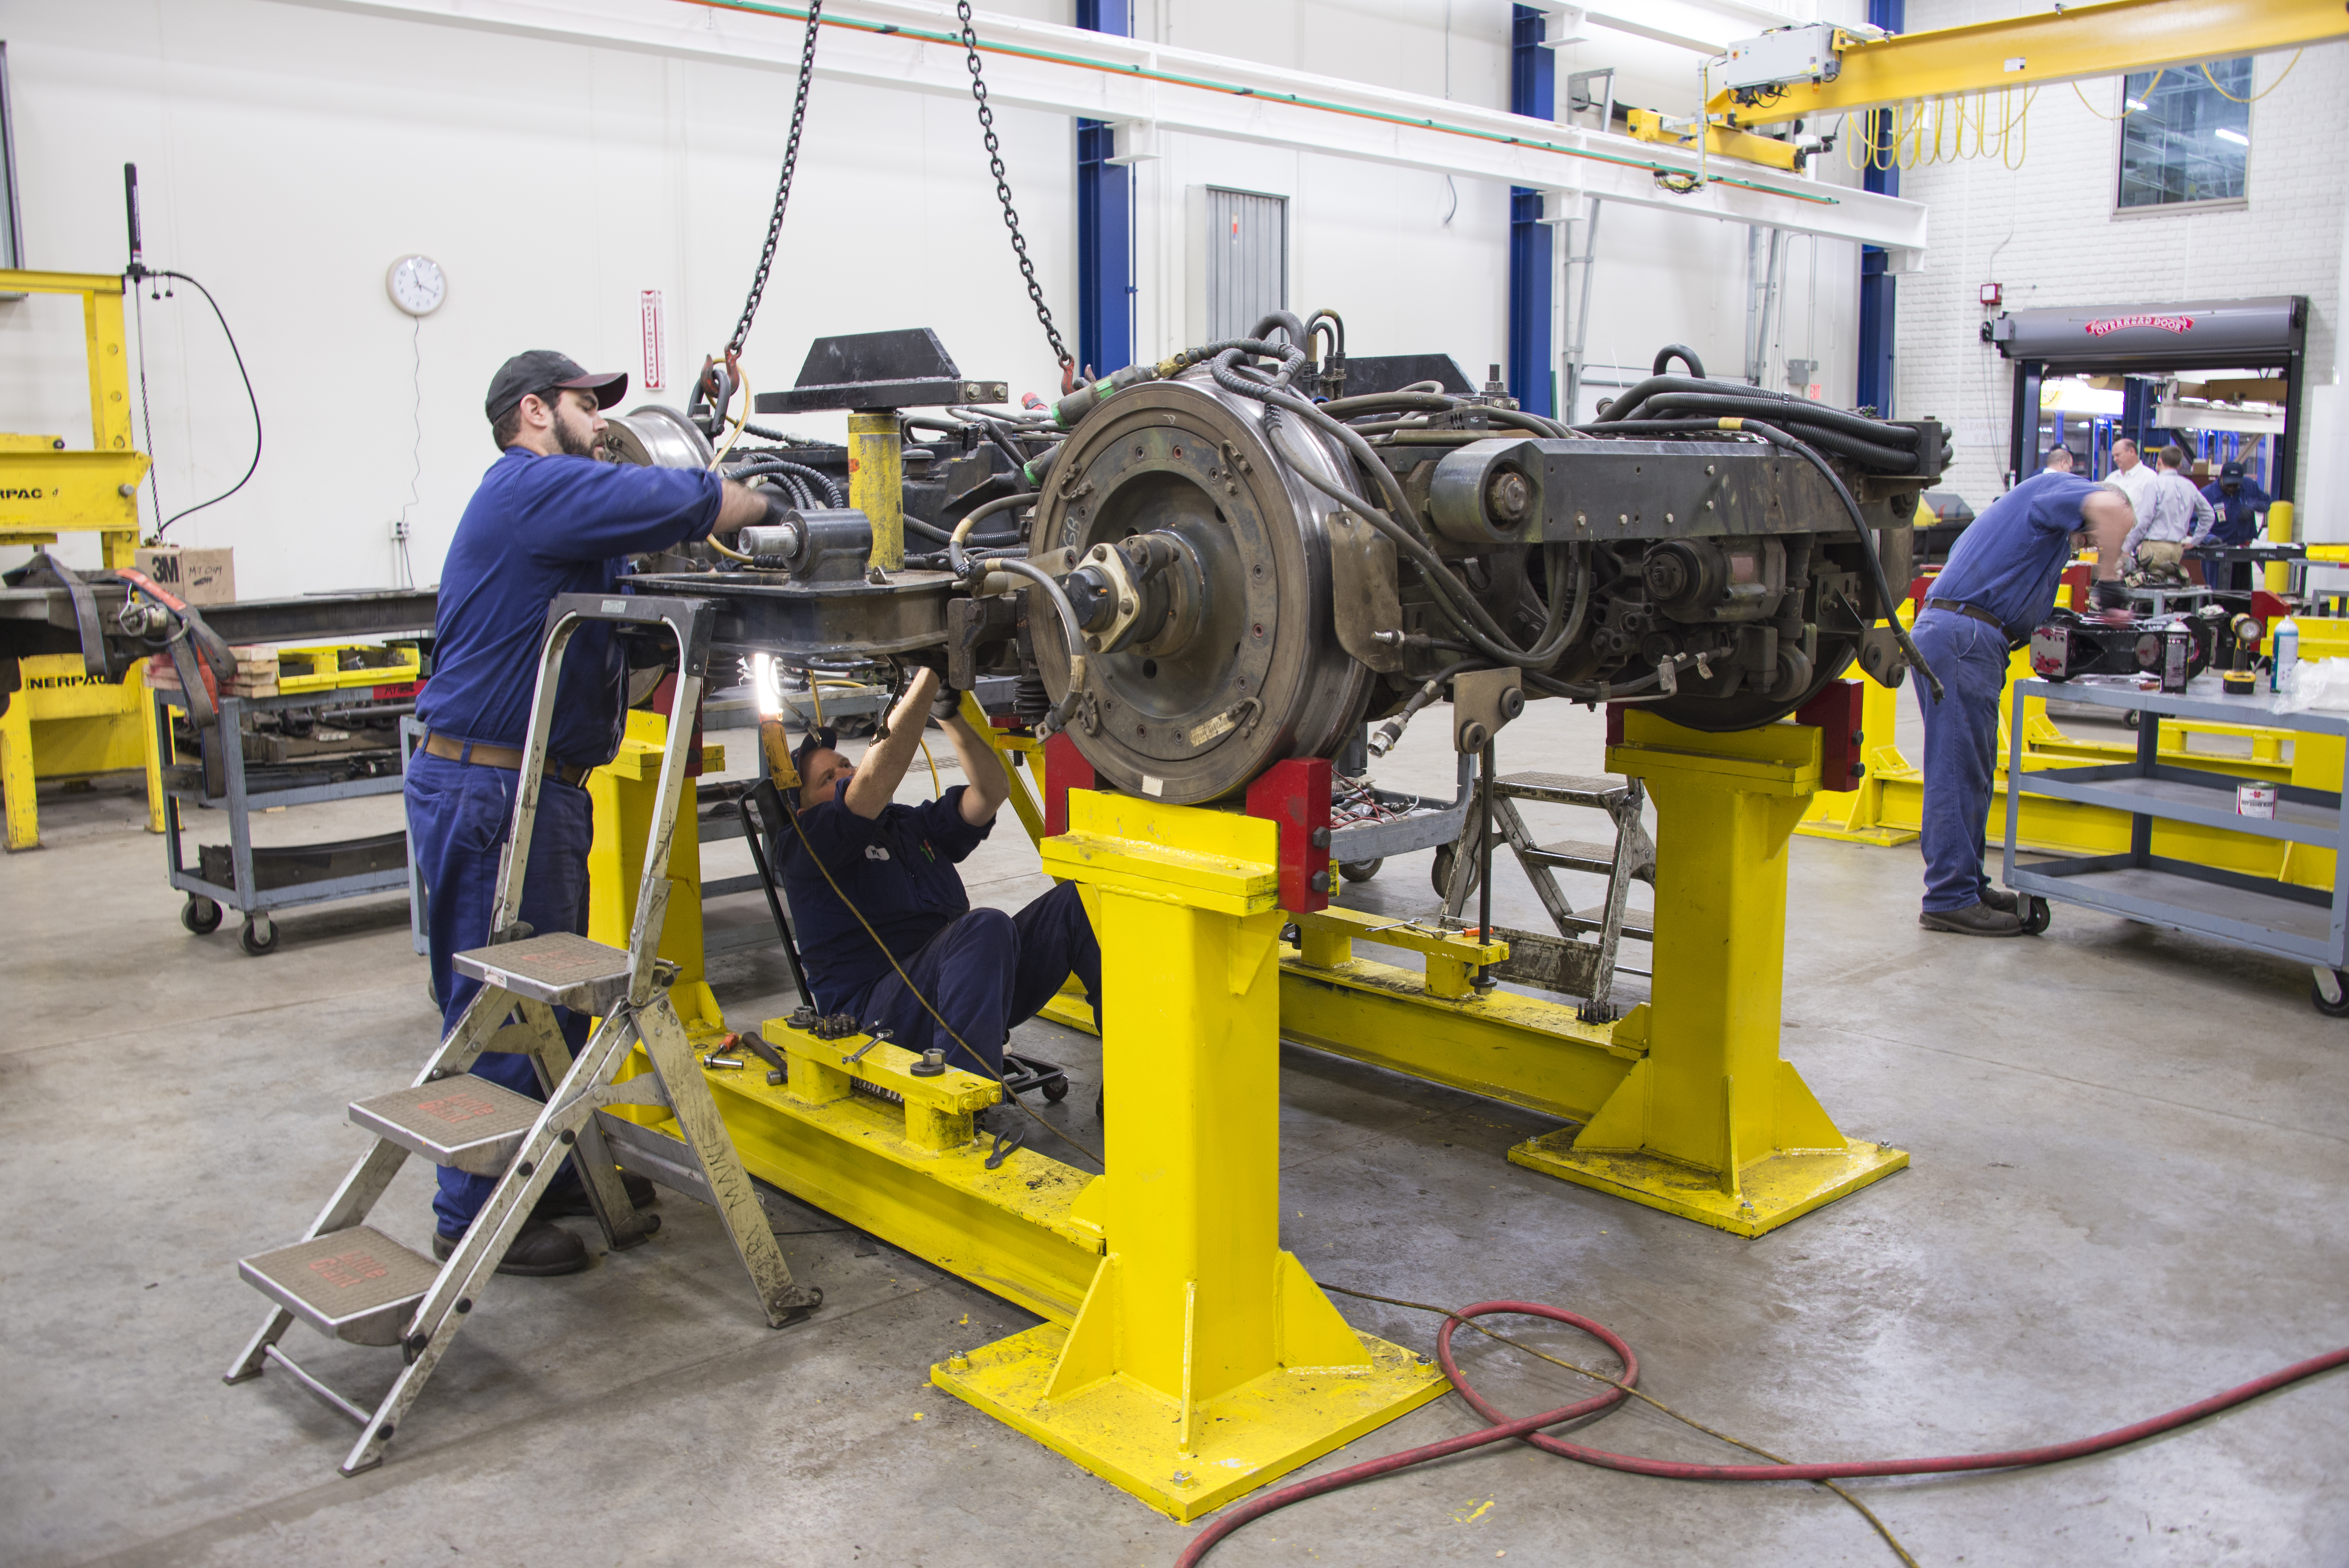 Electro Mechanic-Technicians at the Minneapolis Operations and Maintenance Facility recently embarked on a comprehensive overhaul of the so-called trucks that are bolted to the bottom of each vehicle, containing all of the mechanics that move trains down the tracks.